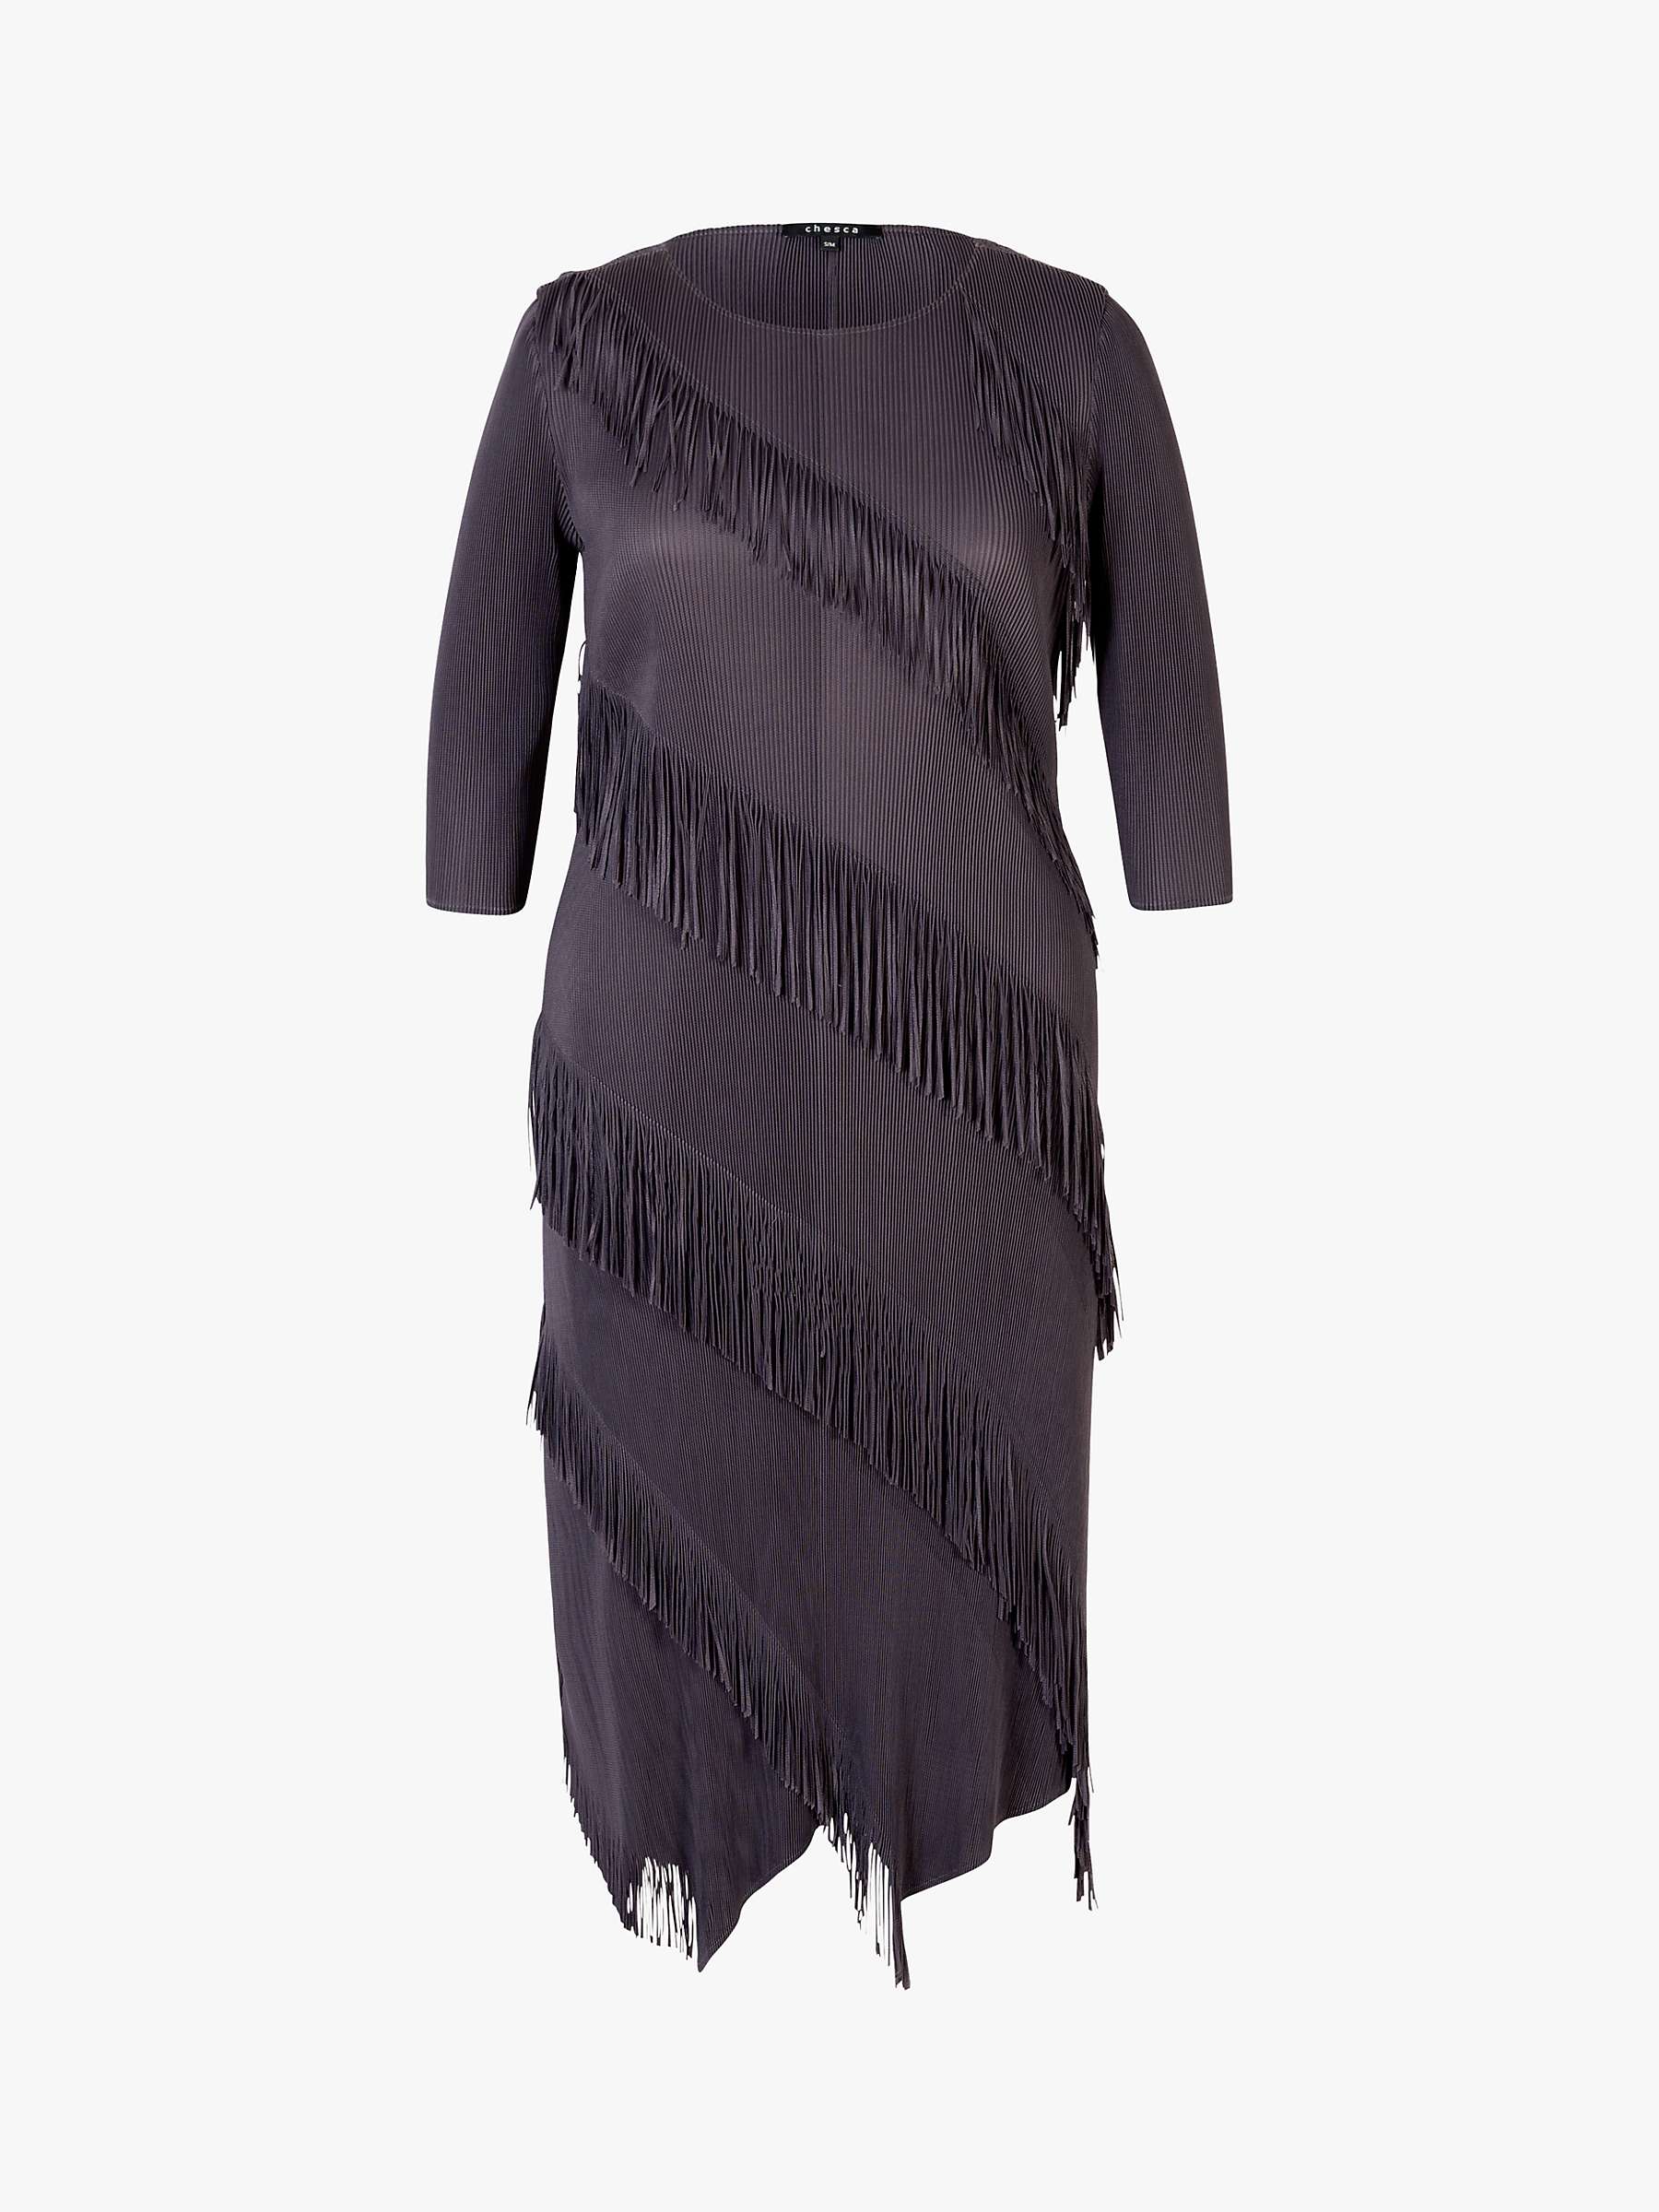 Buy chesca Fringed Pleated Dress, Amethyst Online at johnlewis.com